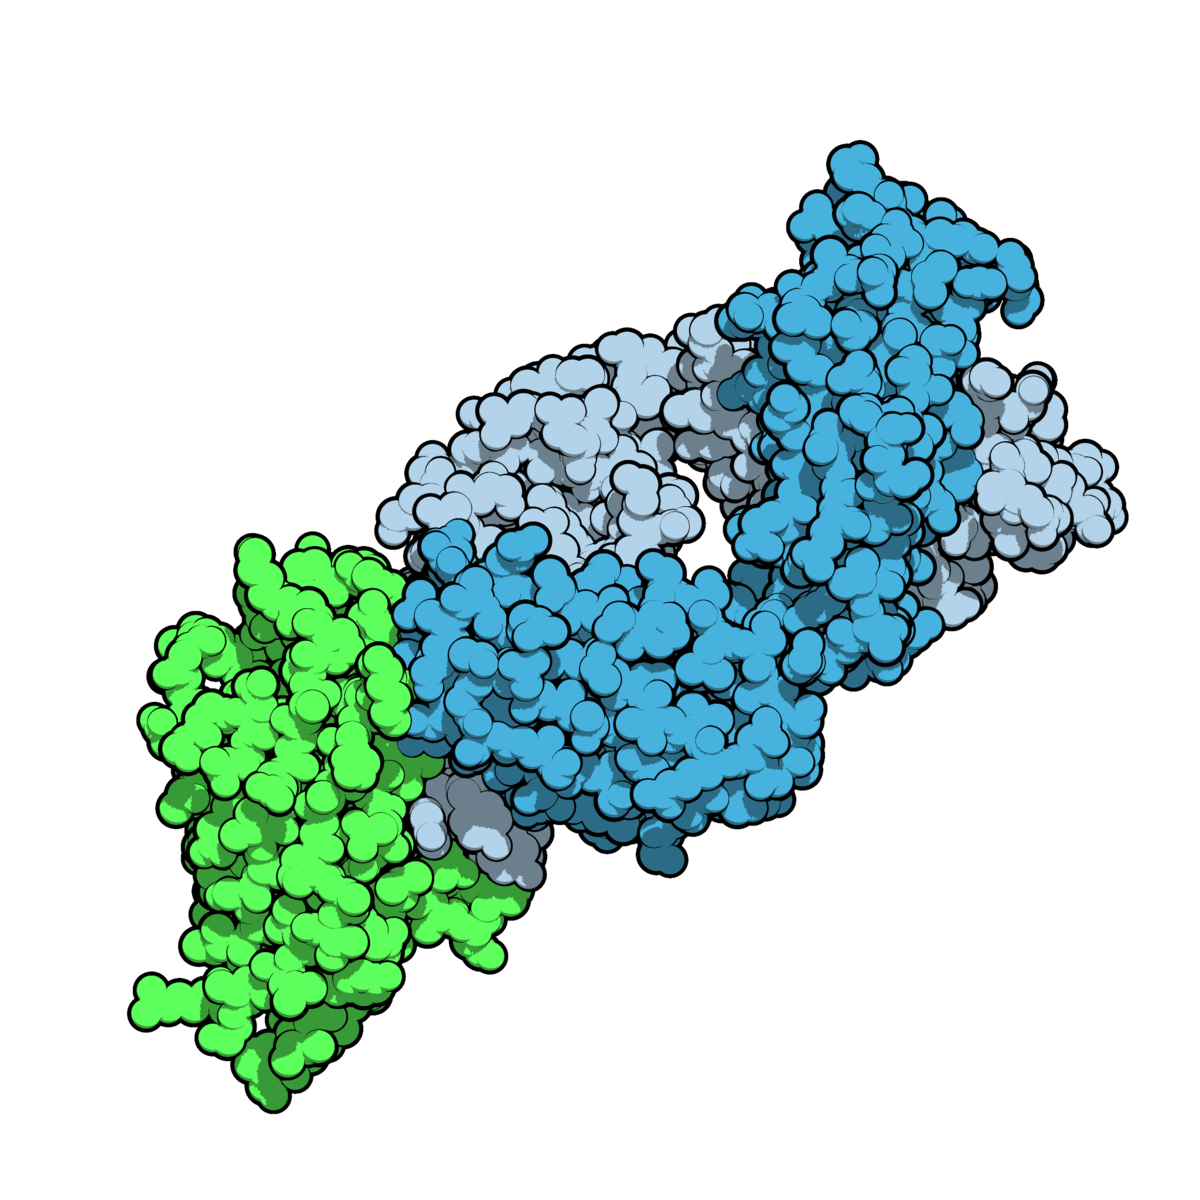 Fig. 2: Space-filling model of the Fab fragment of the monoclonal antibody ipilimumab (blue) bound to its target, CTLA-4 (pale green). Style made to resemble the Protein Data Bank's "Molecule of the Month" series, illustrated by Dr. David S. Goodsell of the Scripps Research Institute. Created using QuteMol (http://qutemol.sourceforge.net).